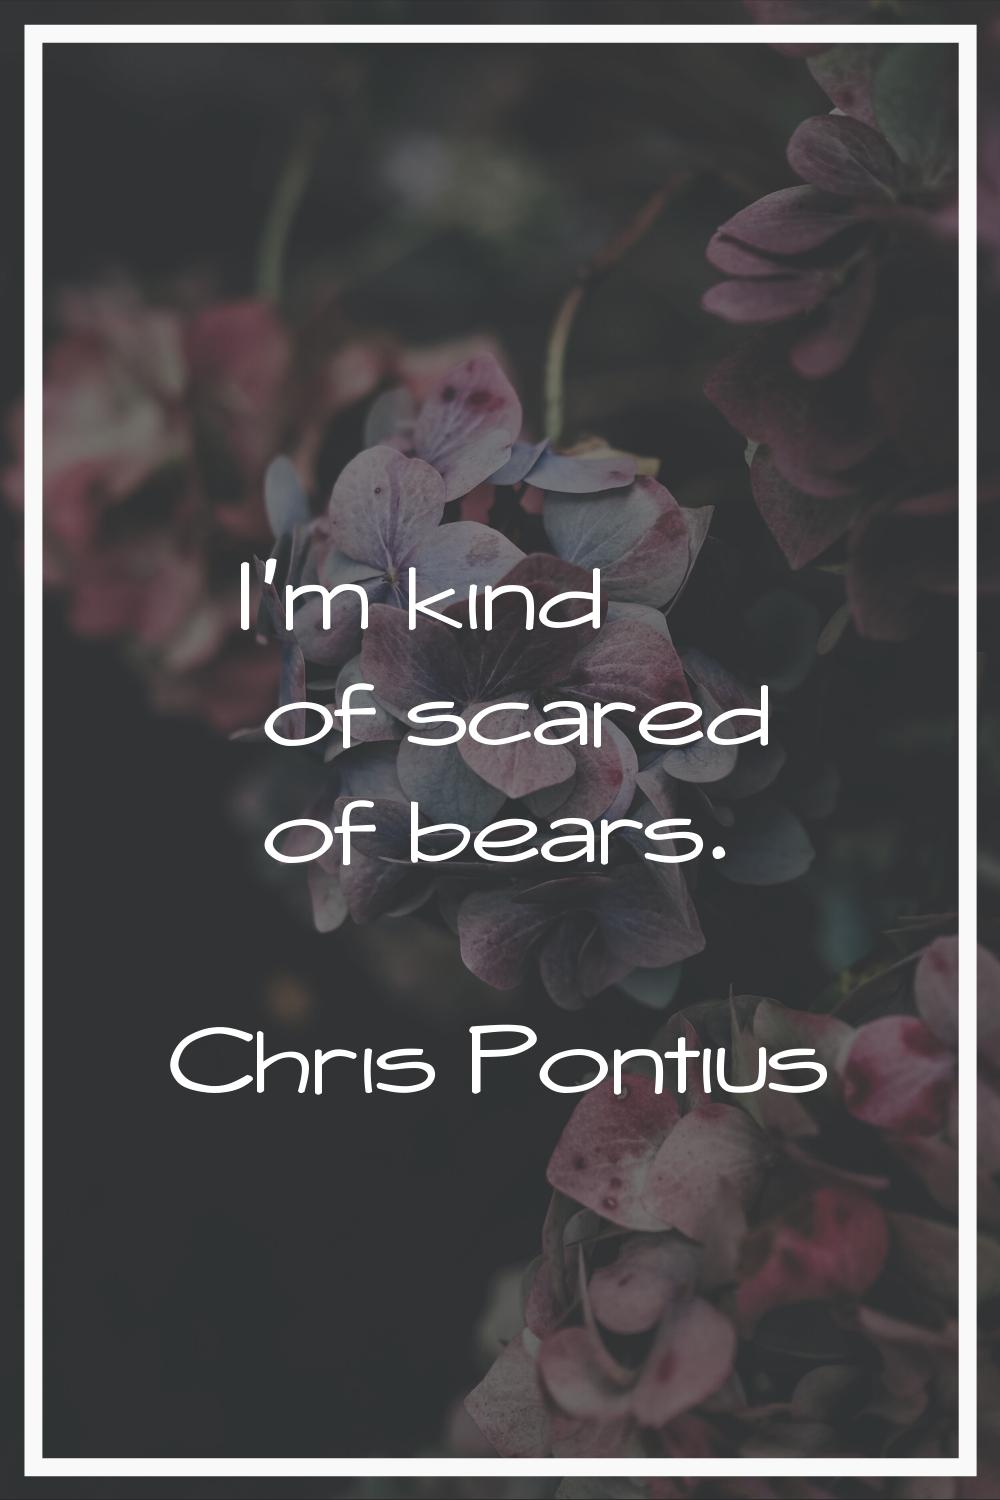 I'm kind of scared of bears.